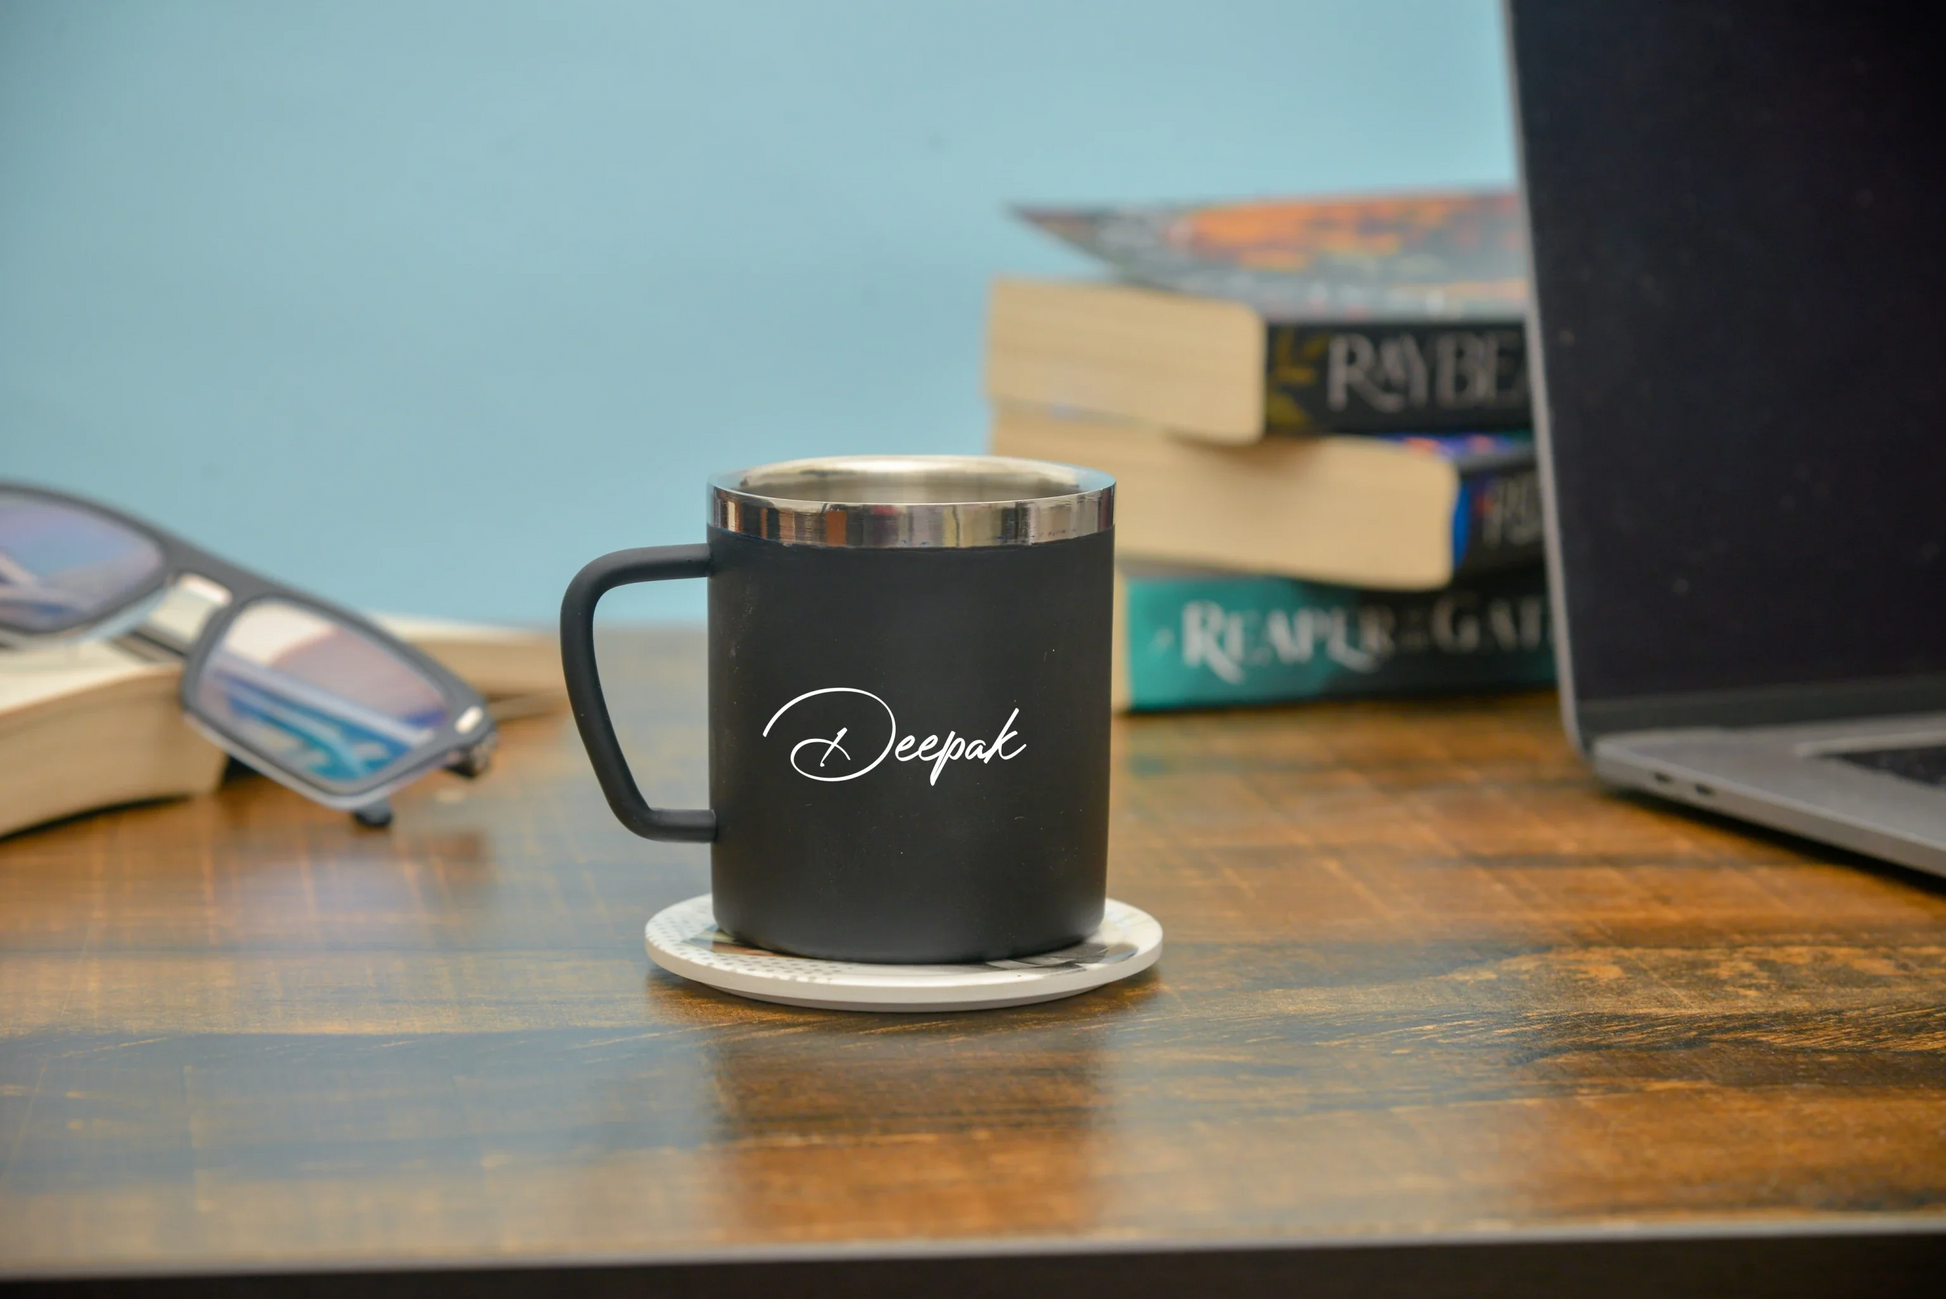 Custom with name tag, gift this amazing mug glossy in outlook and satisfying to touch, decked with plethora of love 